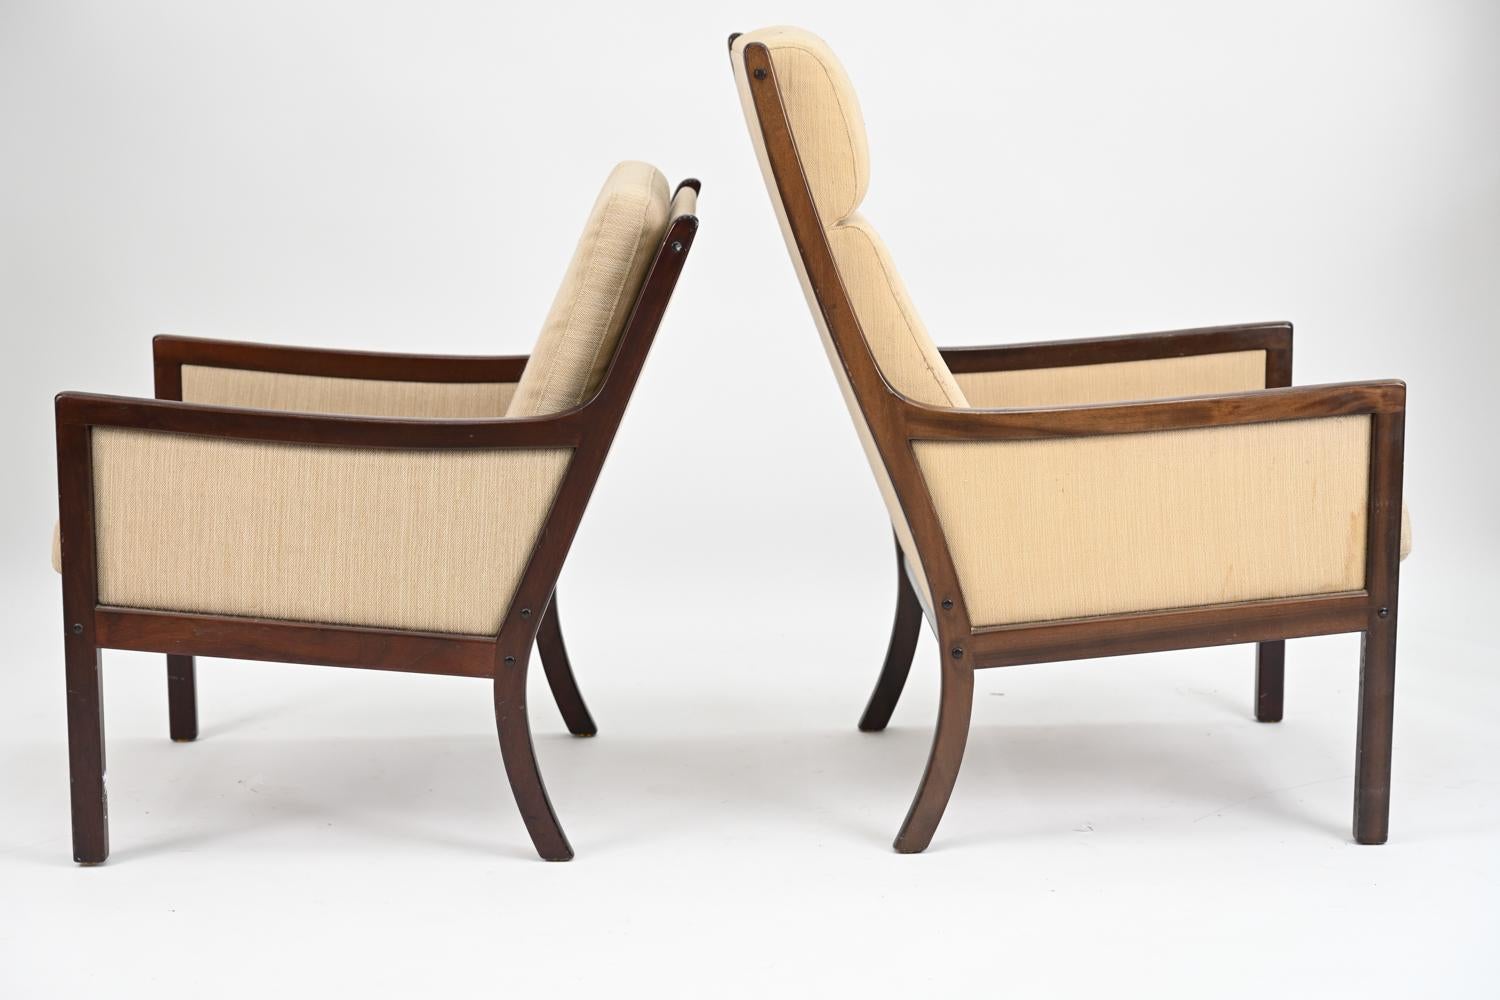 Pair of Ole Wanscher for Poul Jeppesens Møbelfabrik Lounge Chairs 1